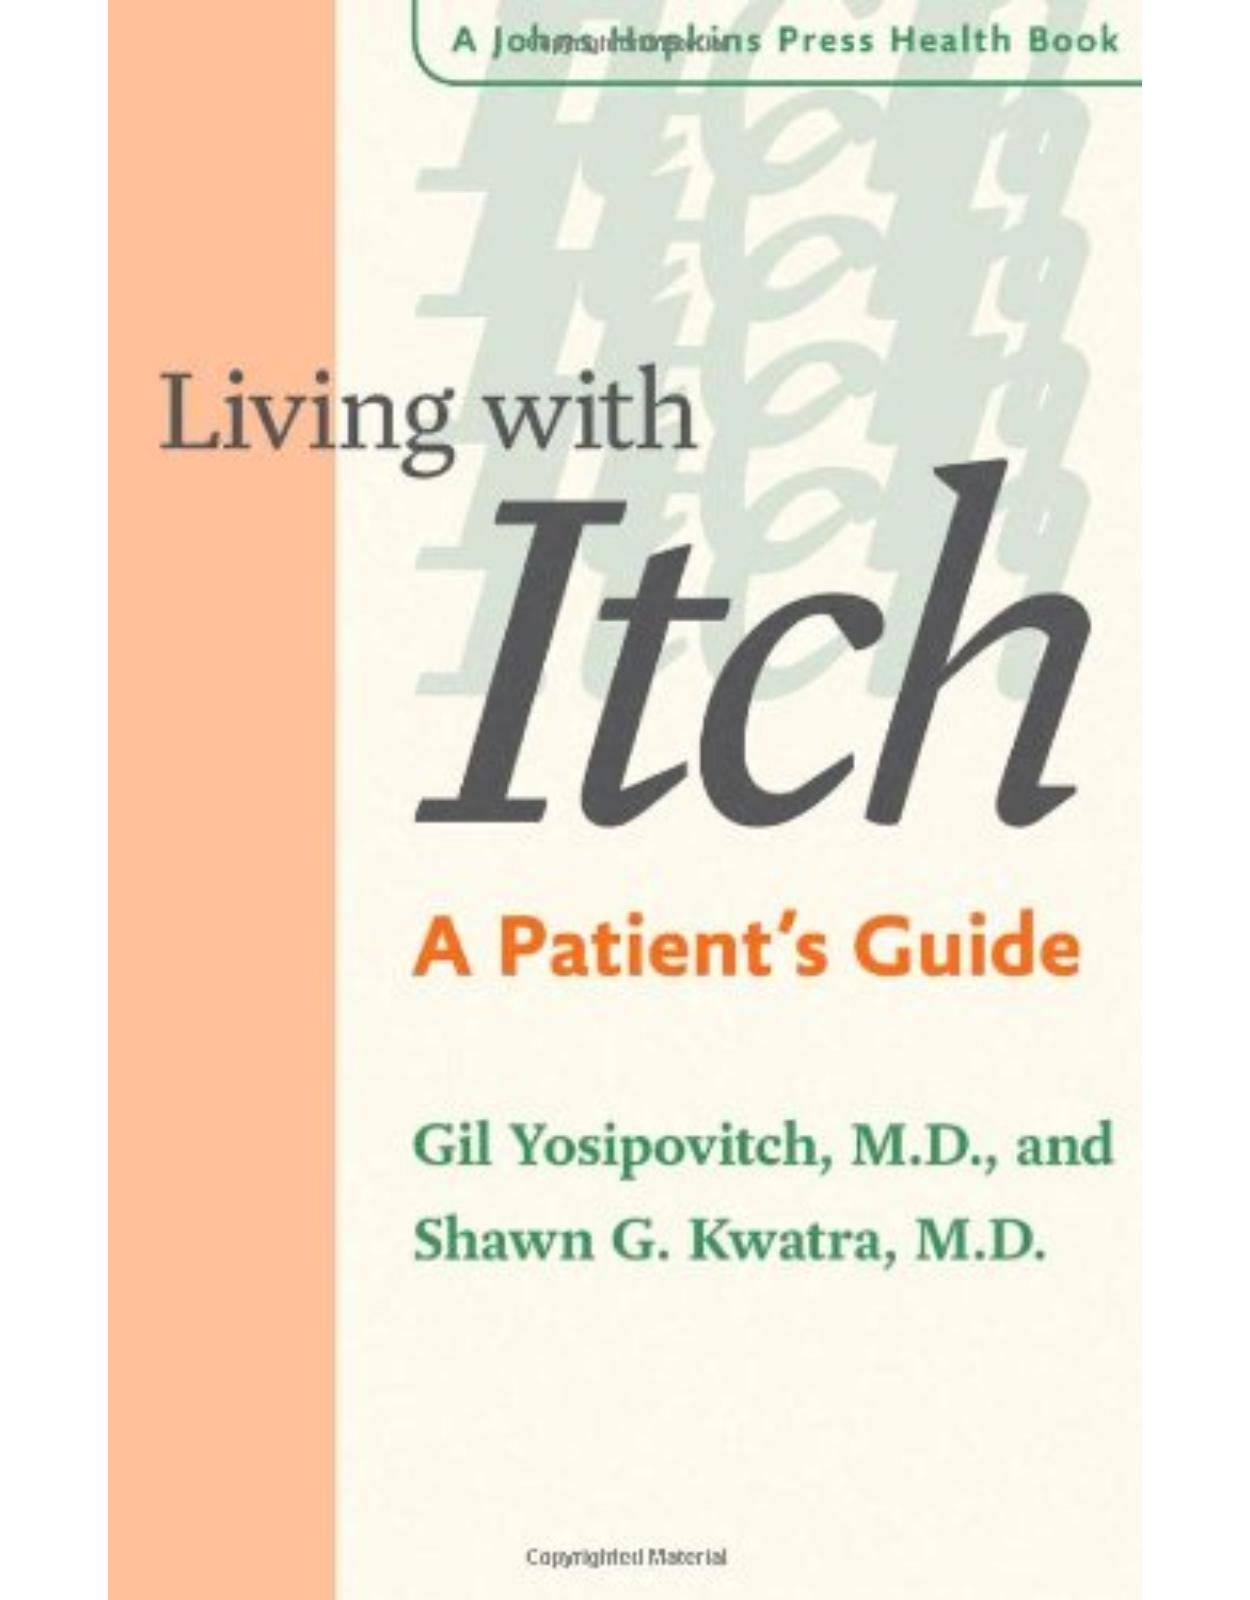 Living with Itch. A Patient s Guide